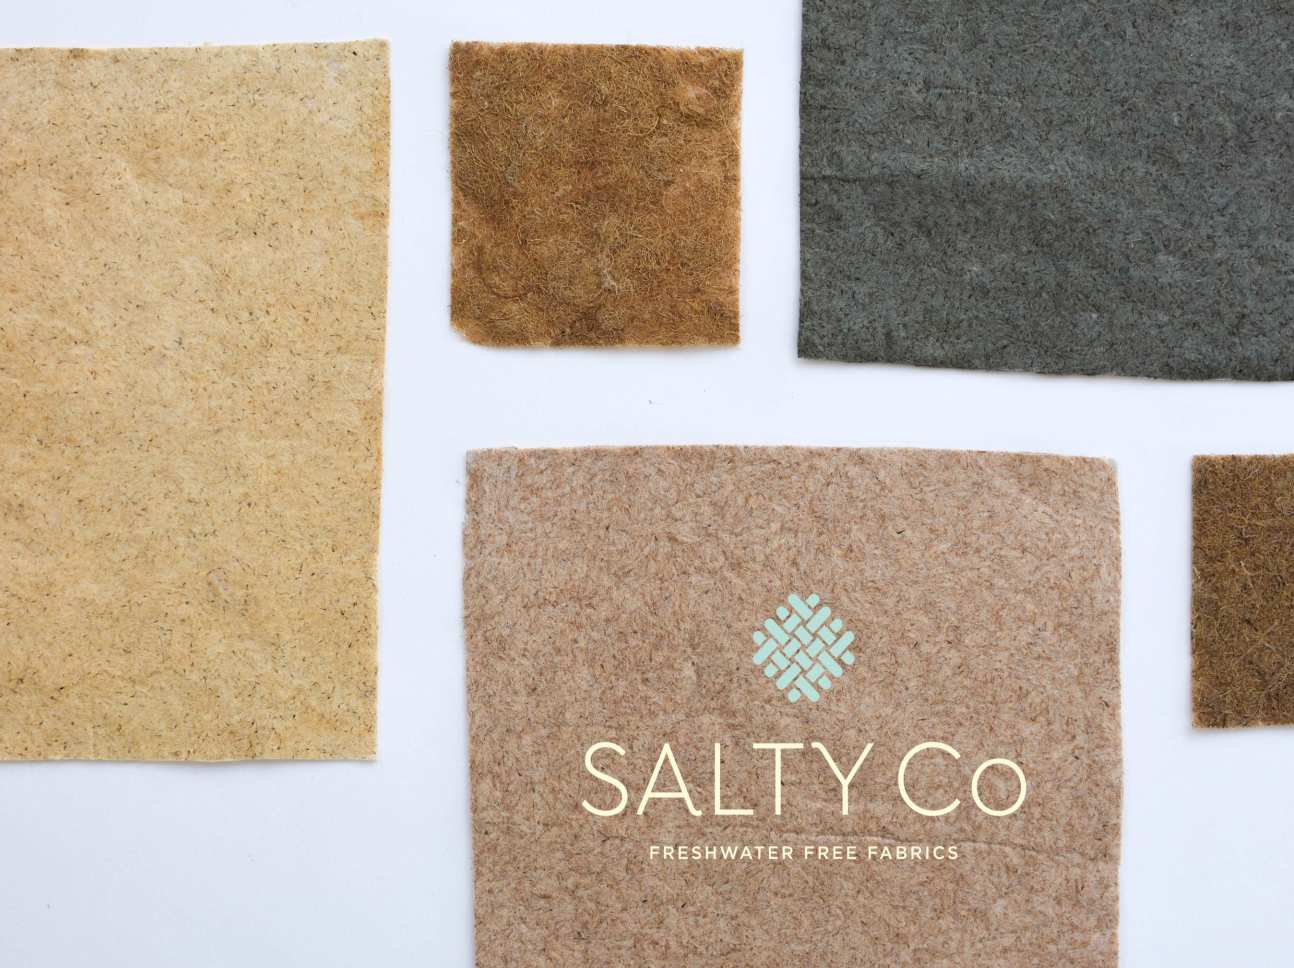 Textiles created by Salty Co